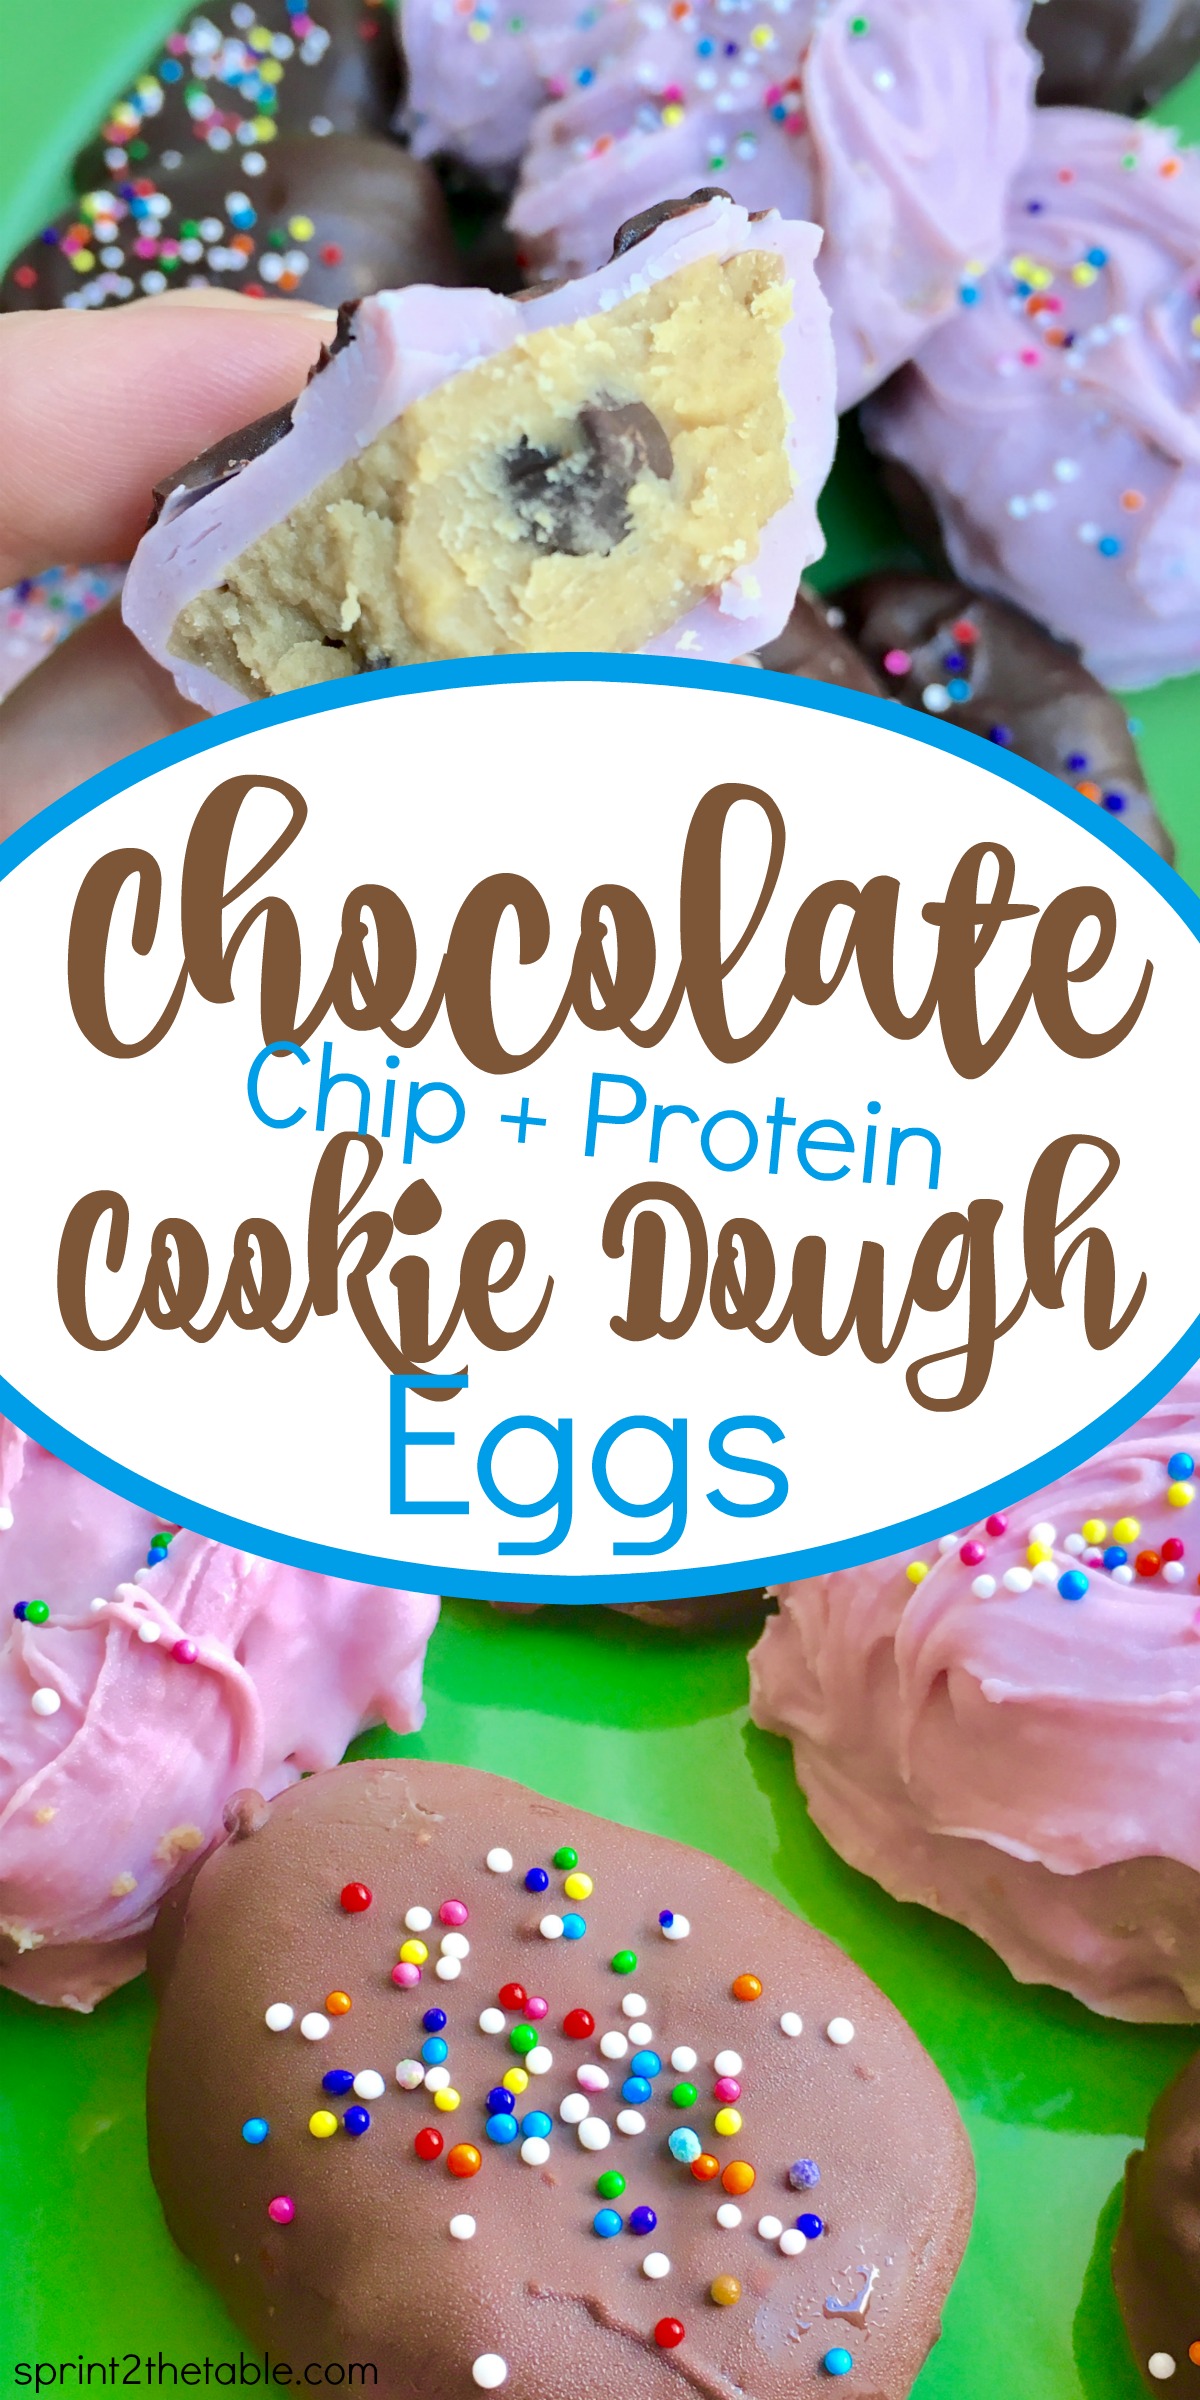 Easter celebrations always call for chocolate eggs.  These protein-laced Chocolate Chip Cookie Dough Easter Eggs take it to the next level with their creamy cookie dough filling!